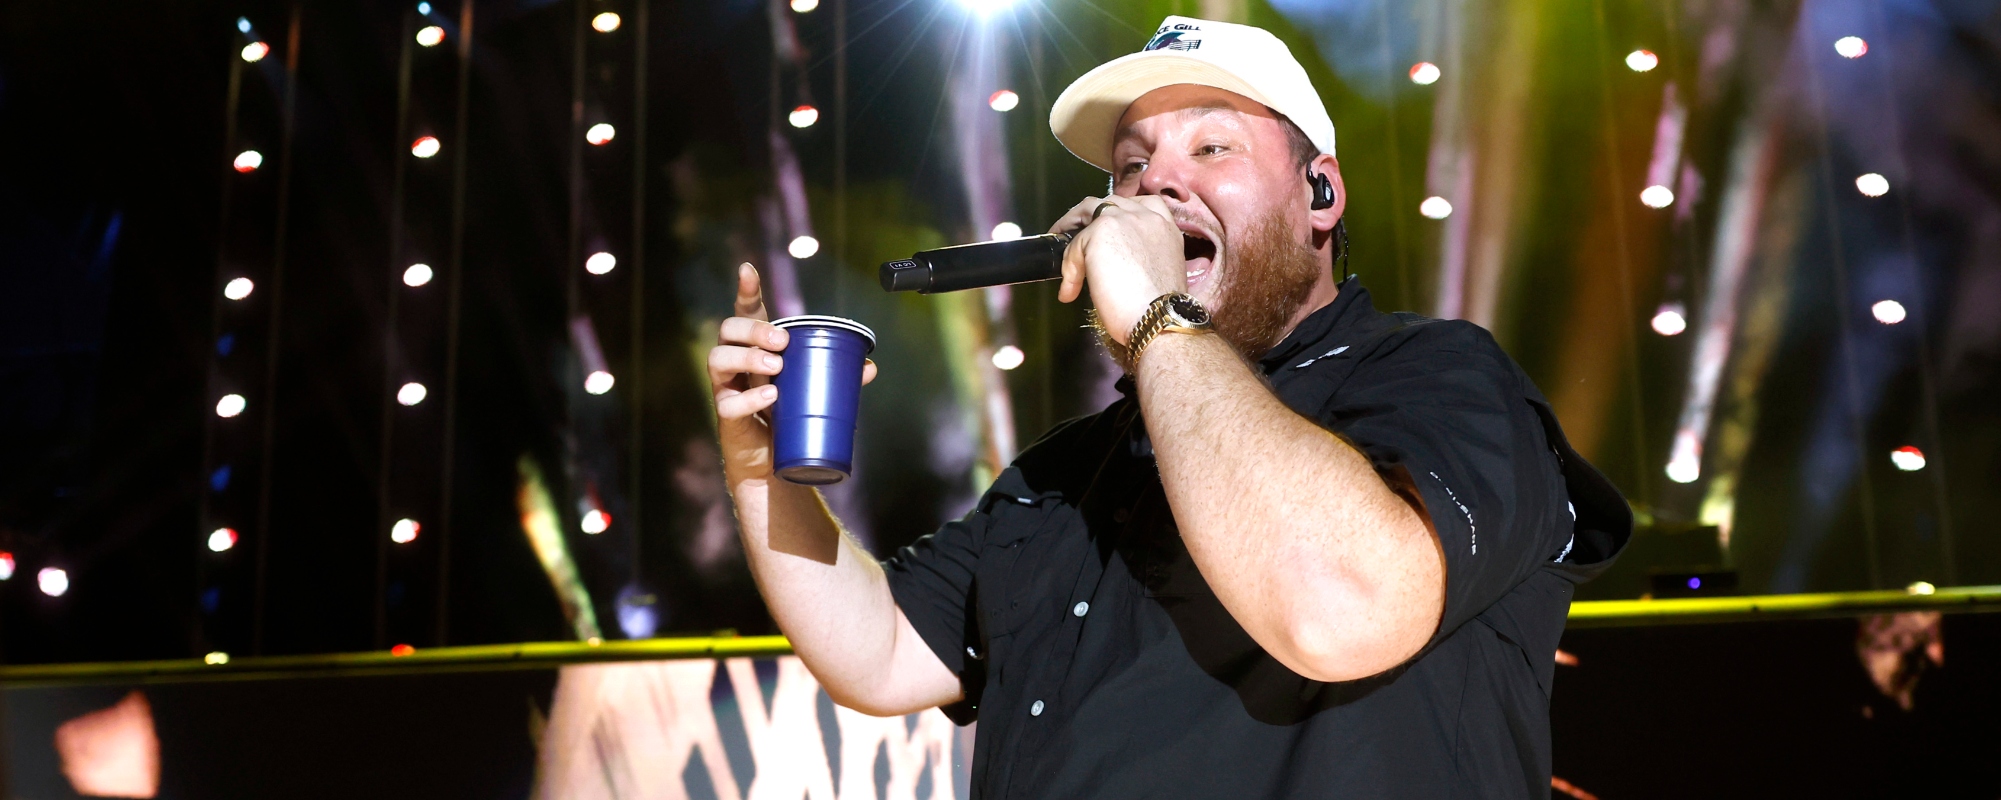 Nashville’s Iconic Wildhorse Saloon Closes Its Doors After Nearly 3 Decades, Luke Combs’ Bar and Venue To Take Its Place